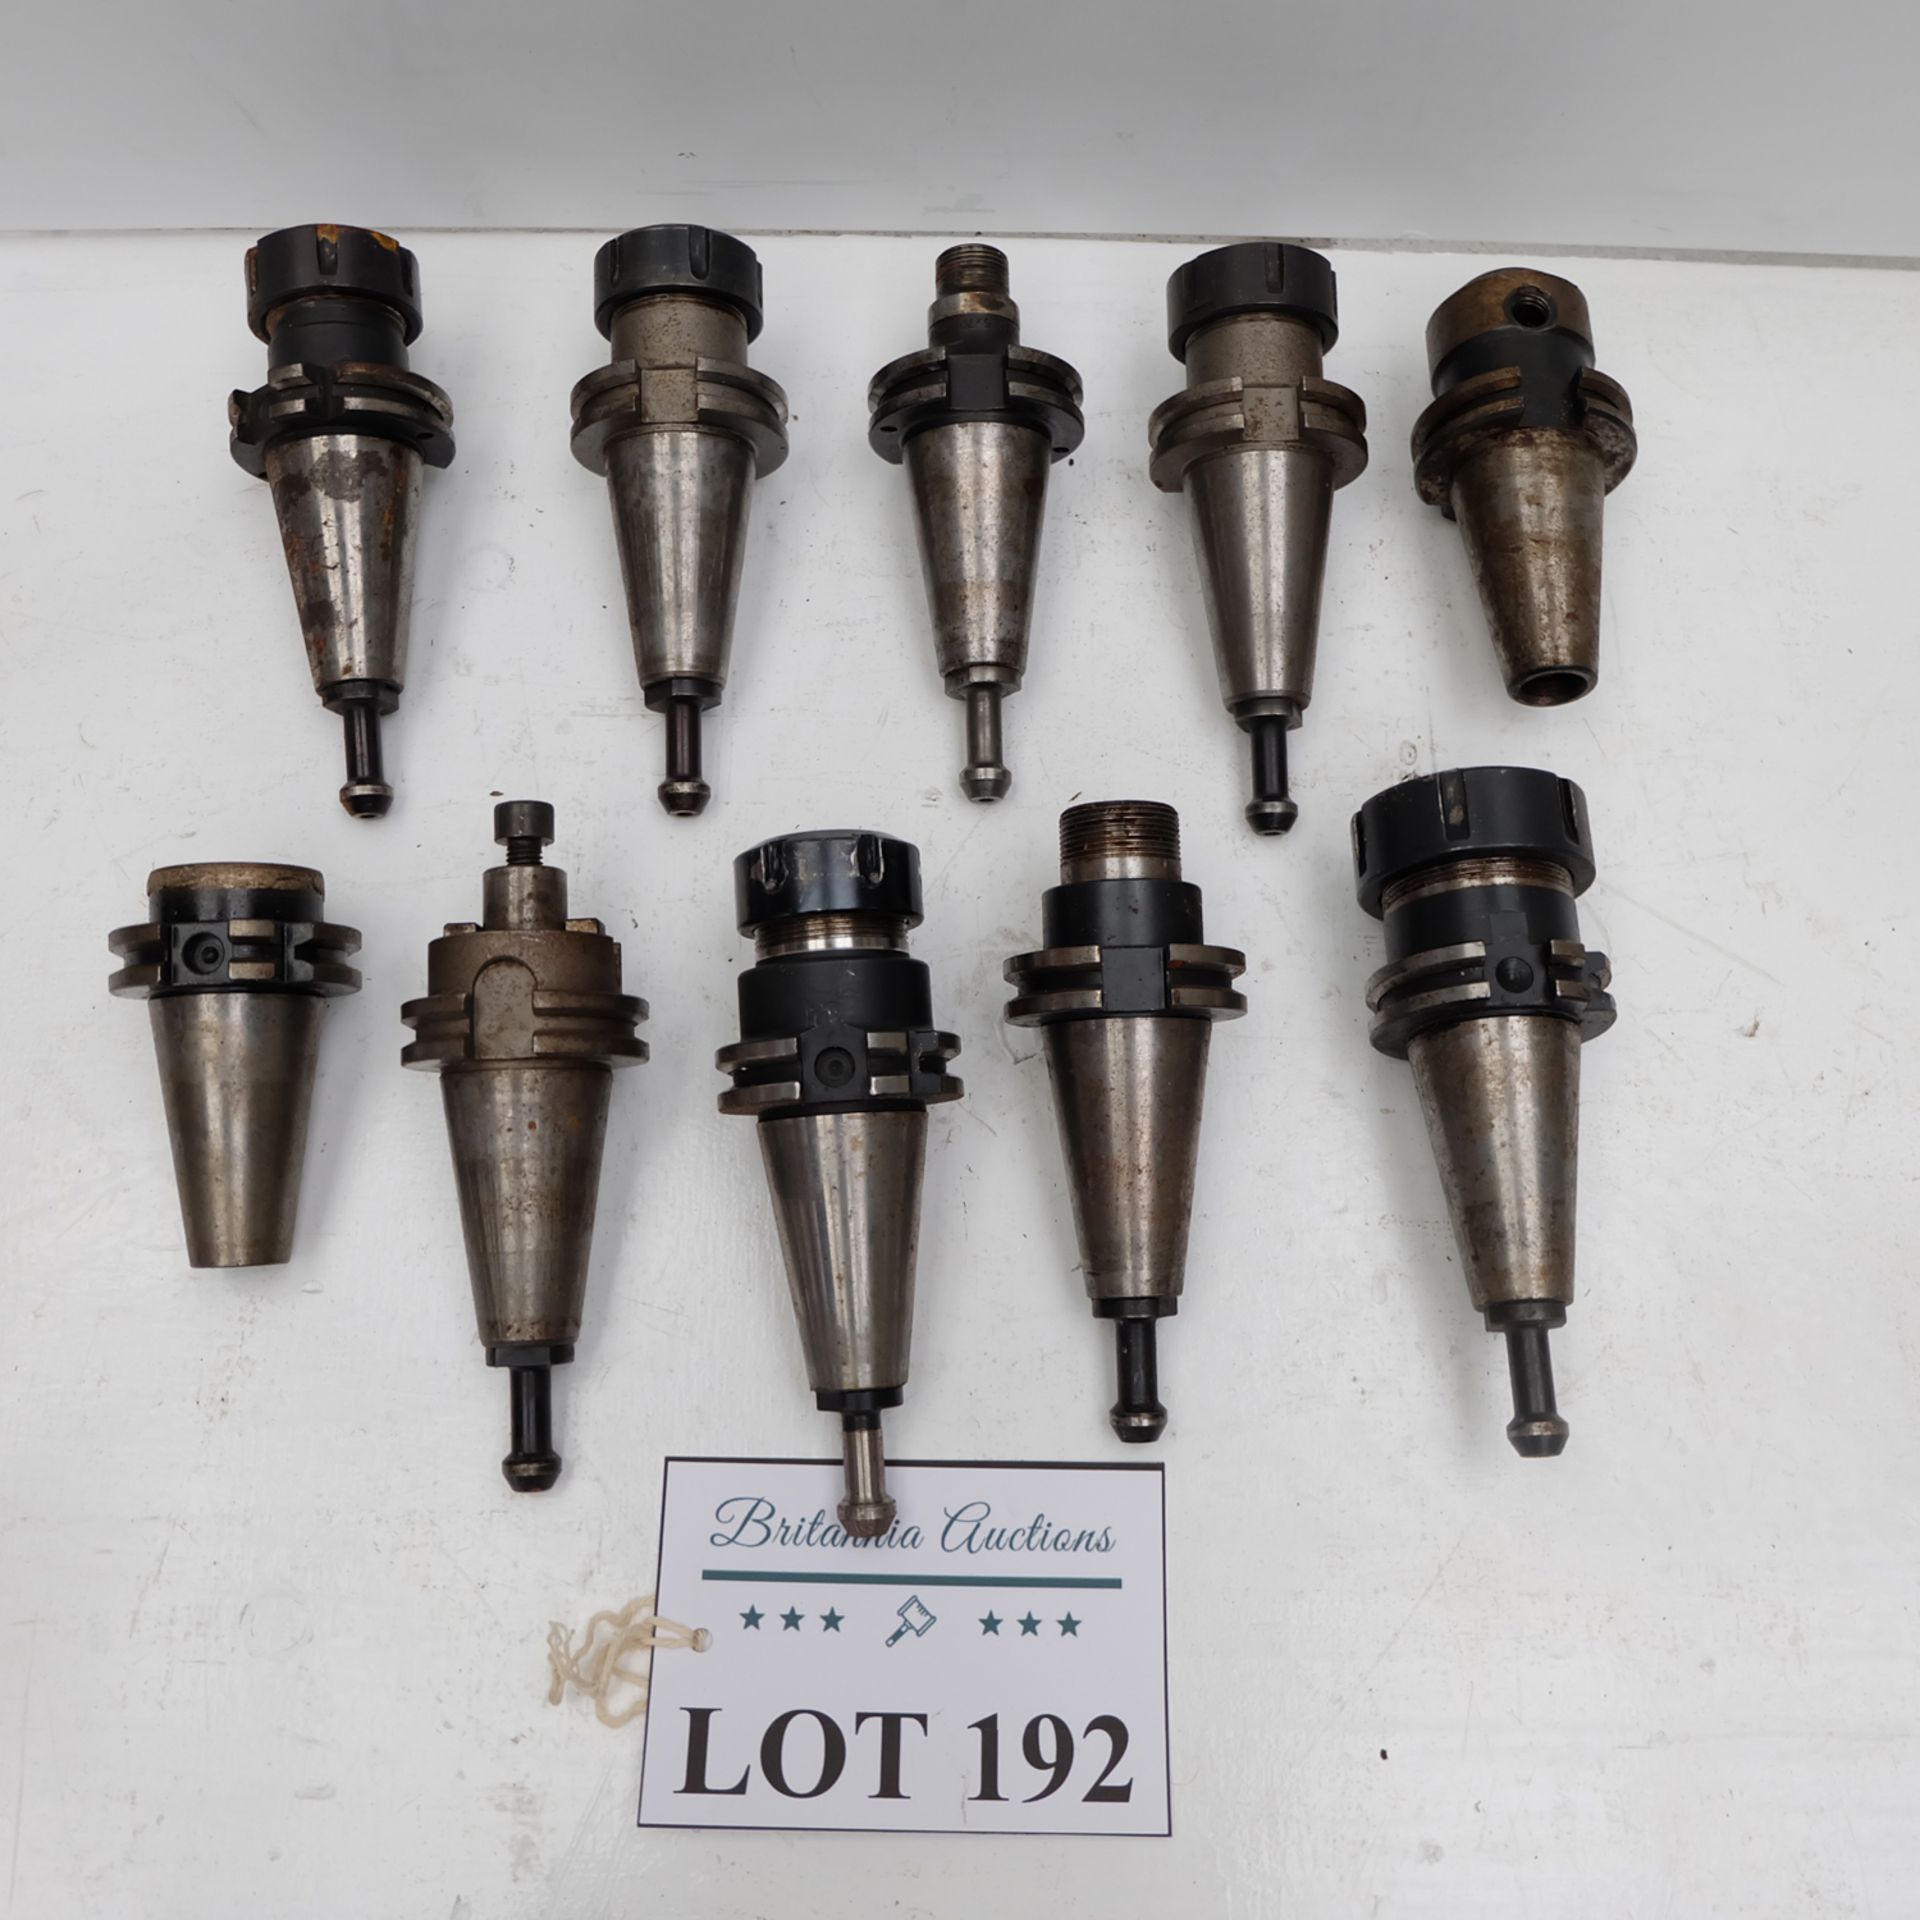 Quantity of 10 x SK40 Spindle Tooling.